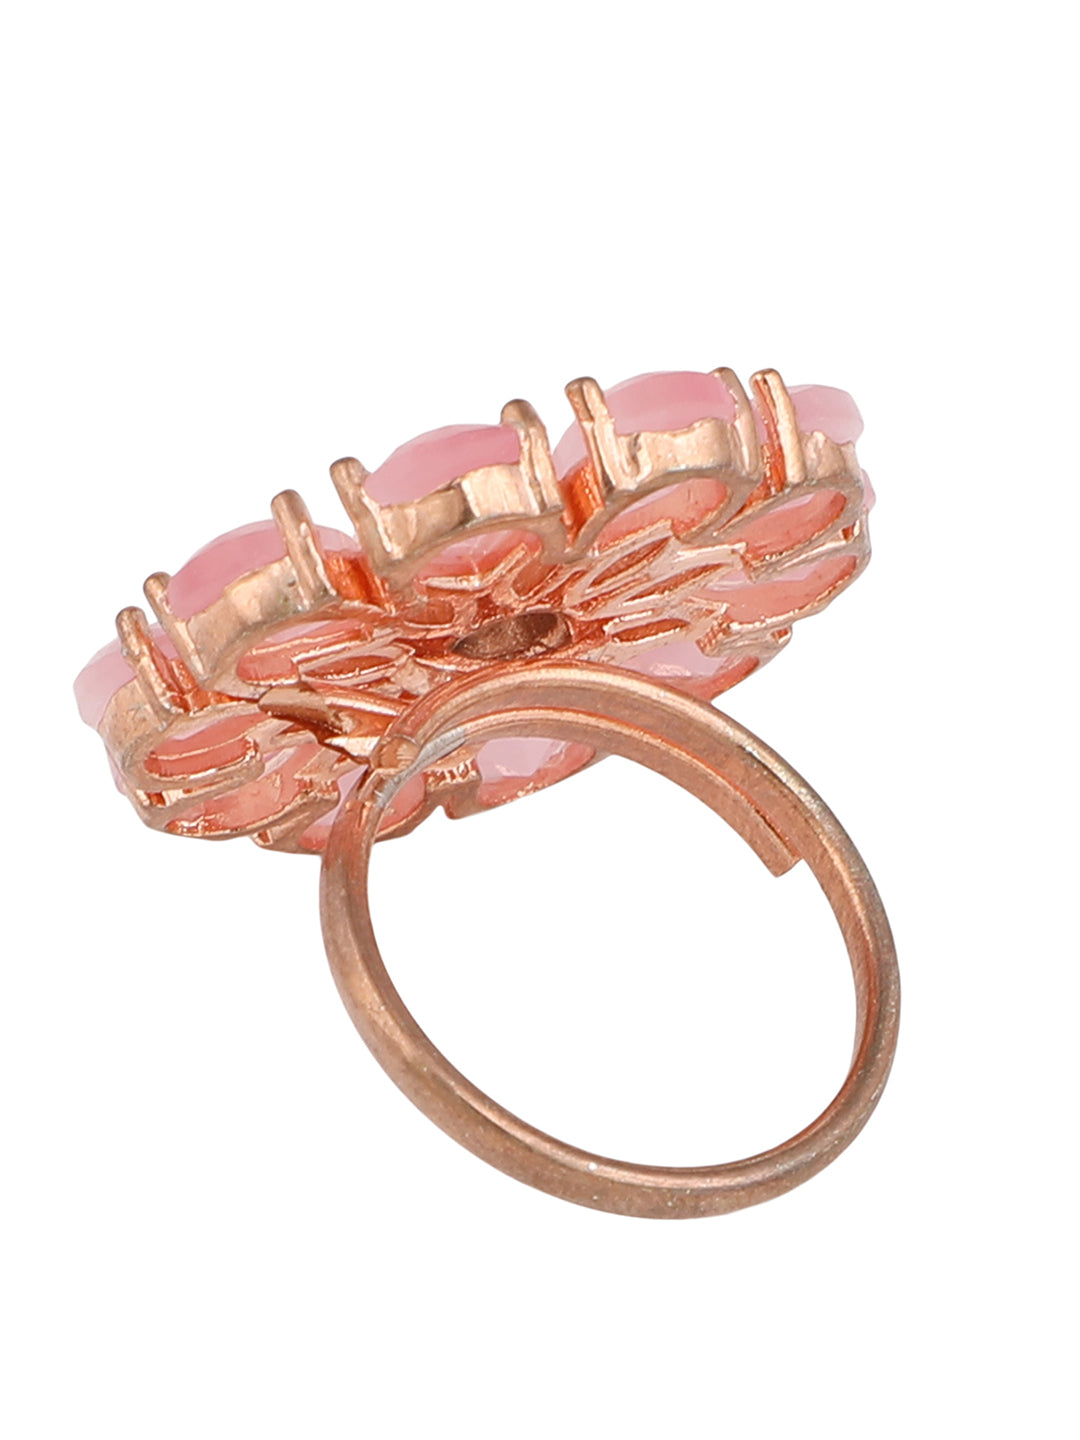 Women's Pink Gold-Plated Ad-Studded Hand Crafted Adjustable Finger Ring - Anikas Creation